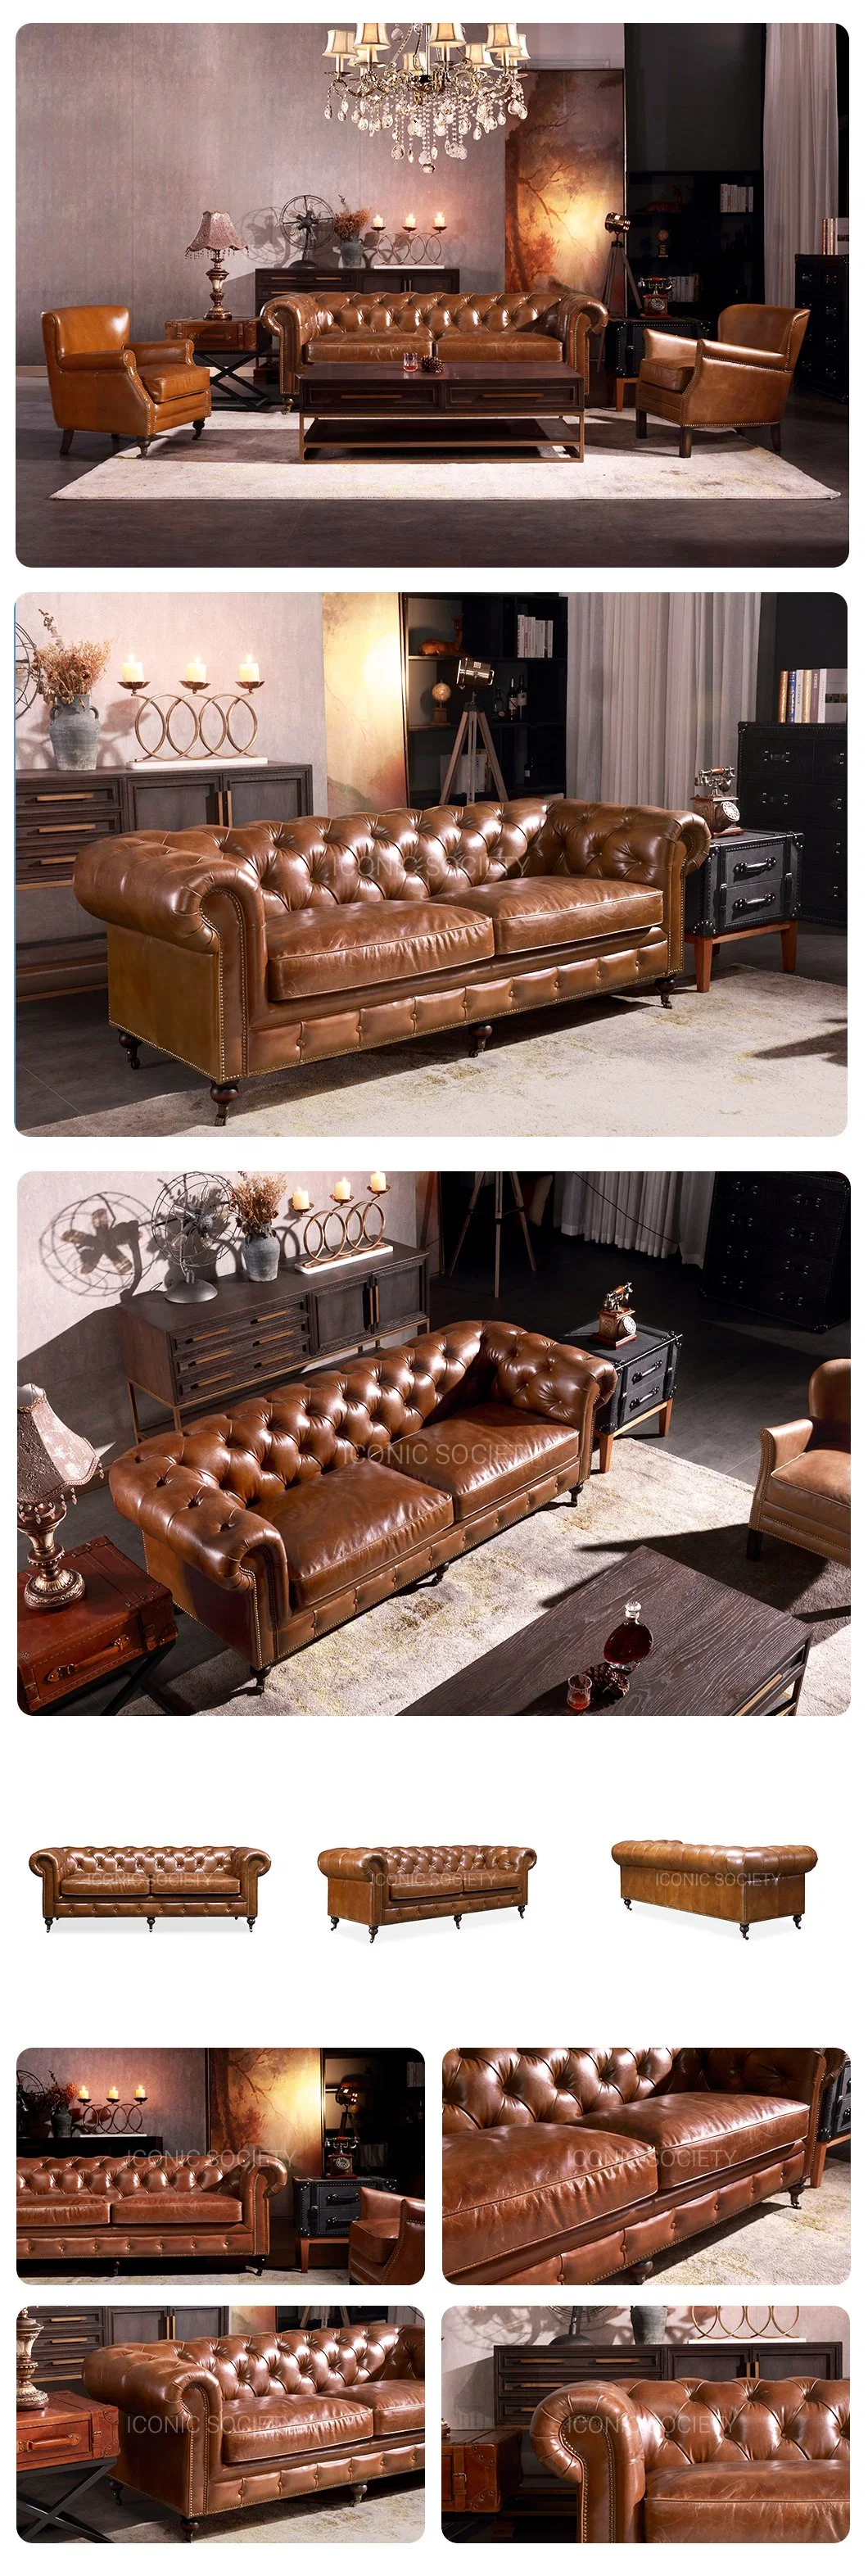 Luxury Living Room Hotel Home Furniture Office Couch Wooden Frame Antique Handmade Classic Style Chesterfield Genuine Leather Sofa